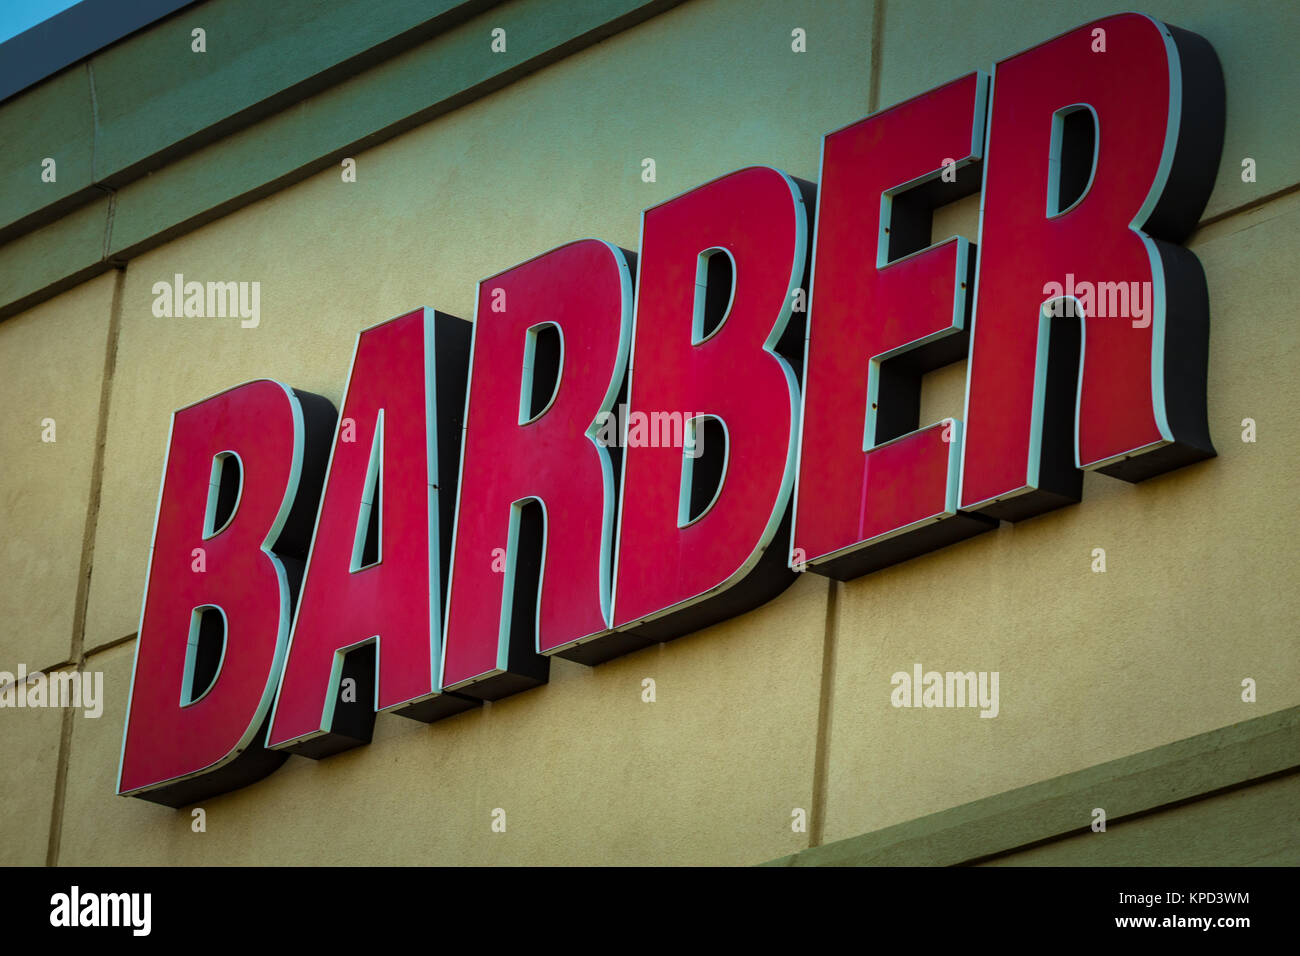 An exterior barber wall sign consiting of red letters only. Stock Photo